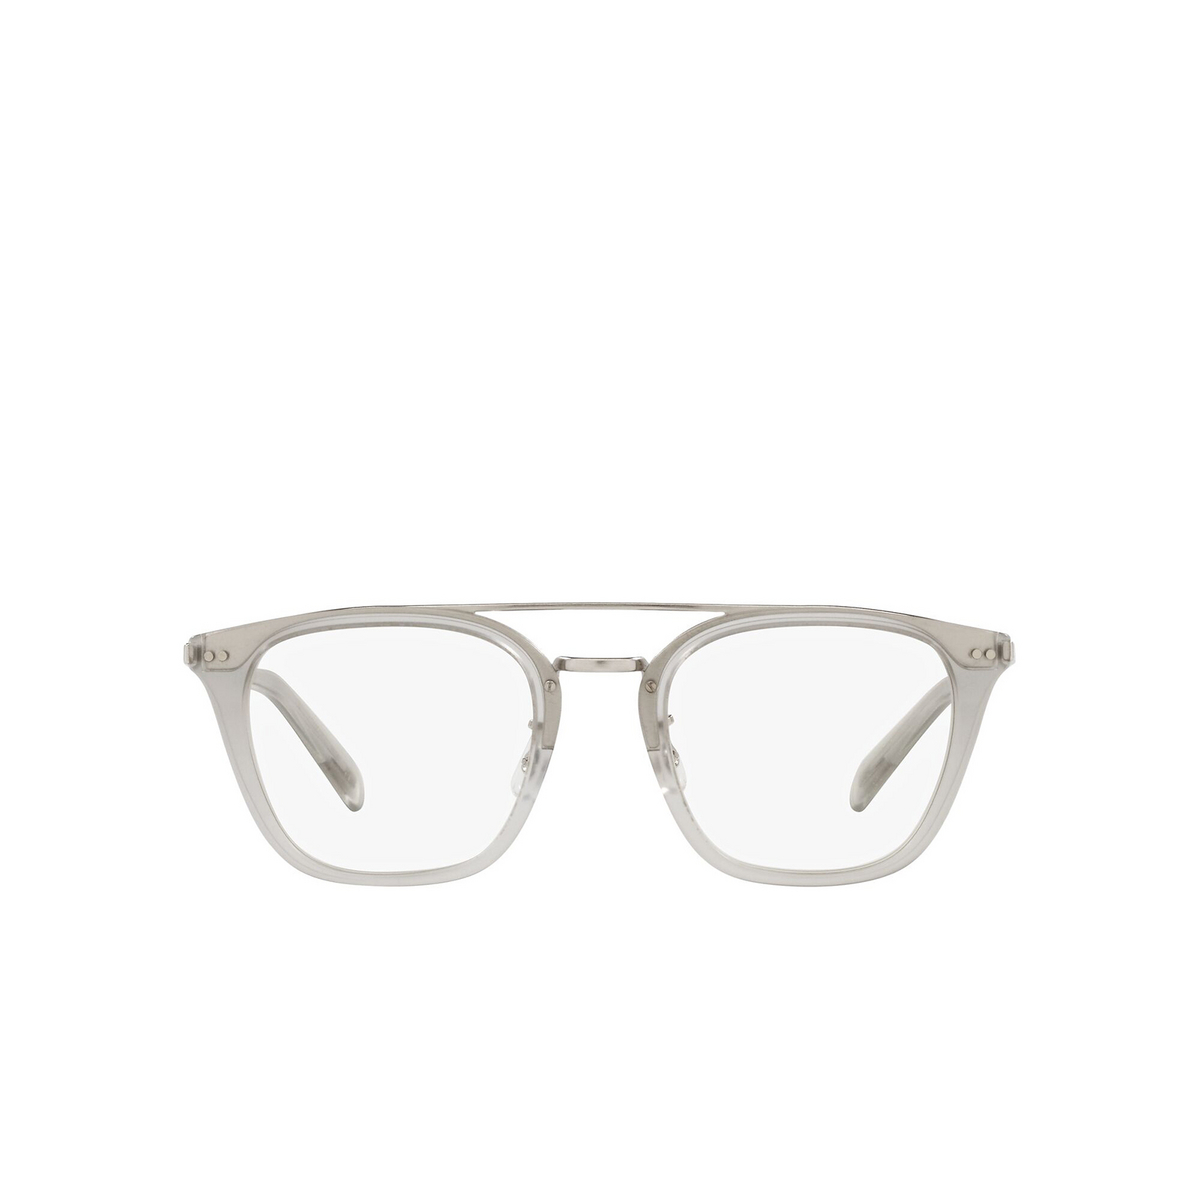 Oliver Peoples FRÈRE LA Sunglasses 1669SB Brushed Chrome - front view